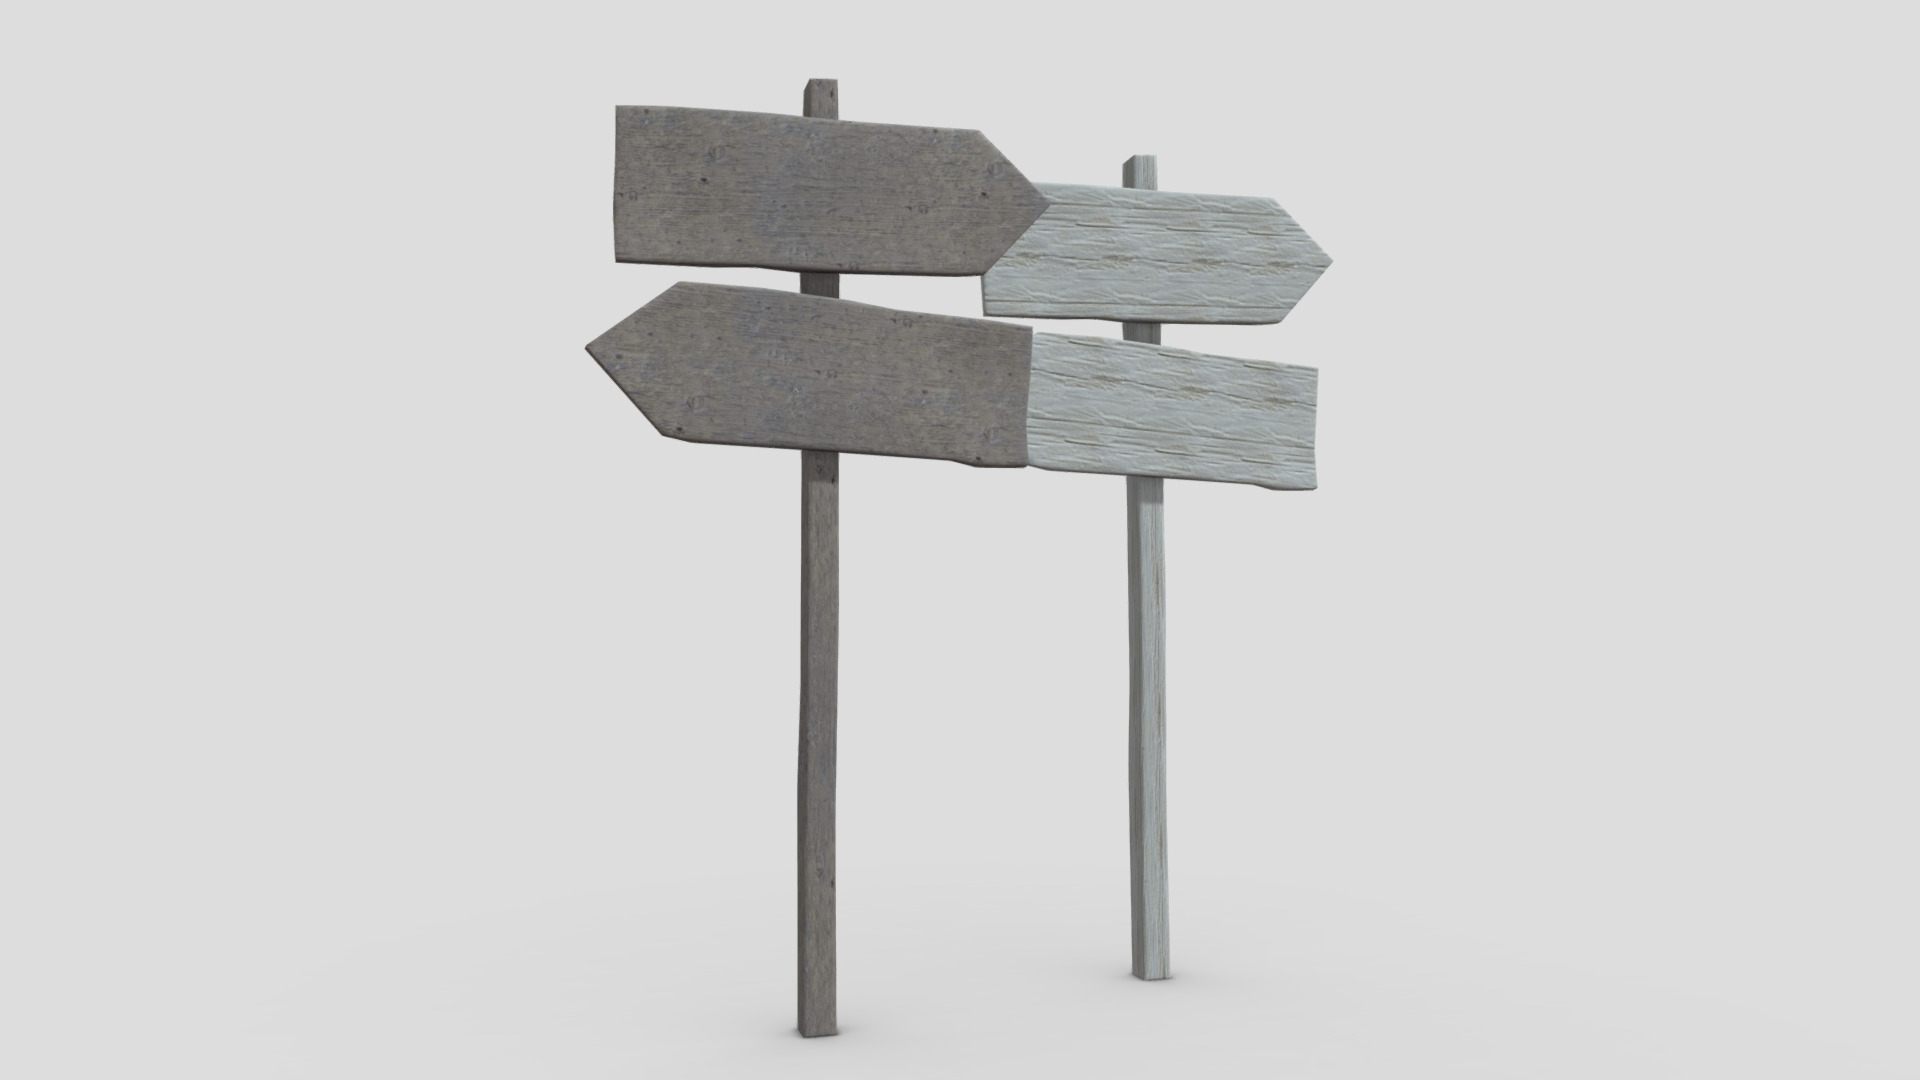 3D model Wooden Sign 2 - This is a 3D model of the Wooden Sign 2. The 3D model is about a wooden birdhouse on a pole.